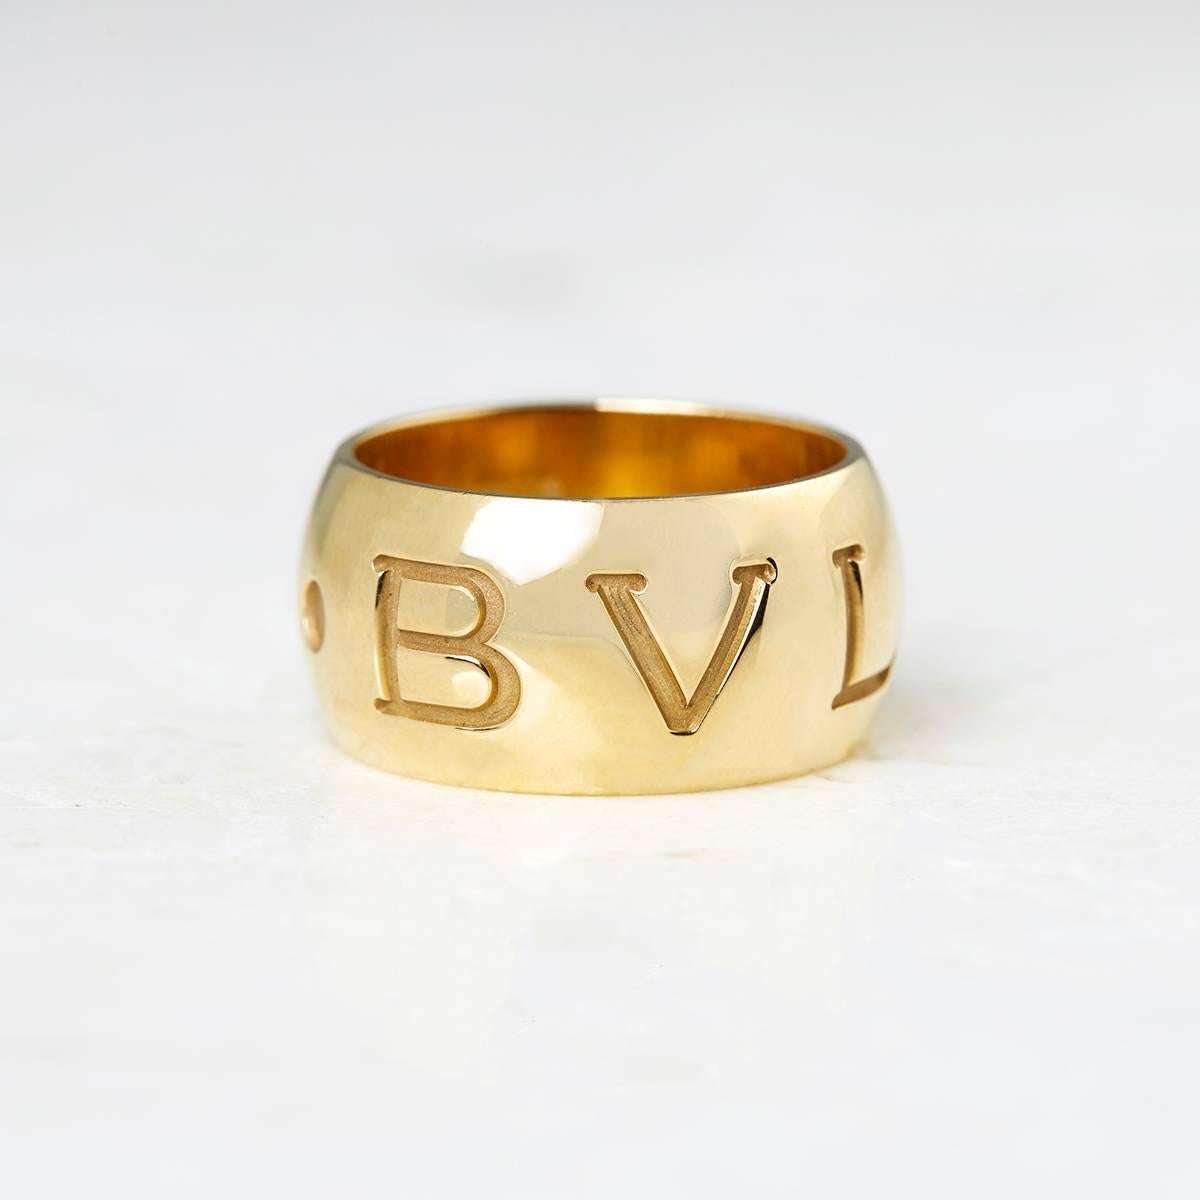 Xupes Code: J122
Brand: Bulgari
Description: 18k Yellow Gold Monologo Ring
Accompanied With: Box Only
Gender: Ladies
UK Ring Size: L
EU Ring Size: 52
US Ring Size: 6
Resizing Possible?: NO
Band Width: 1cm
Condition: 9
Material: Yellow Gold
Total